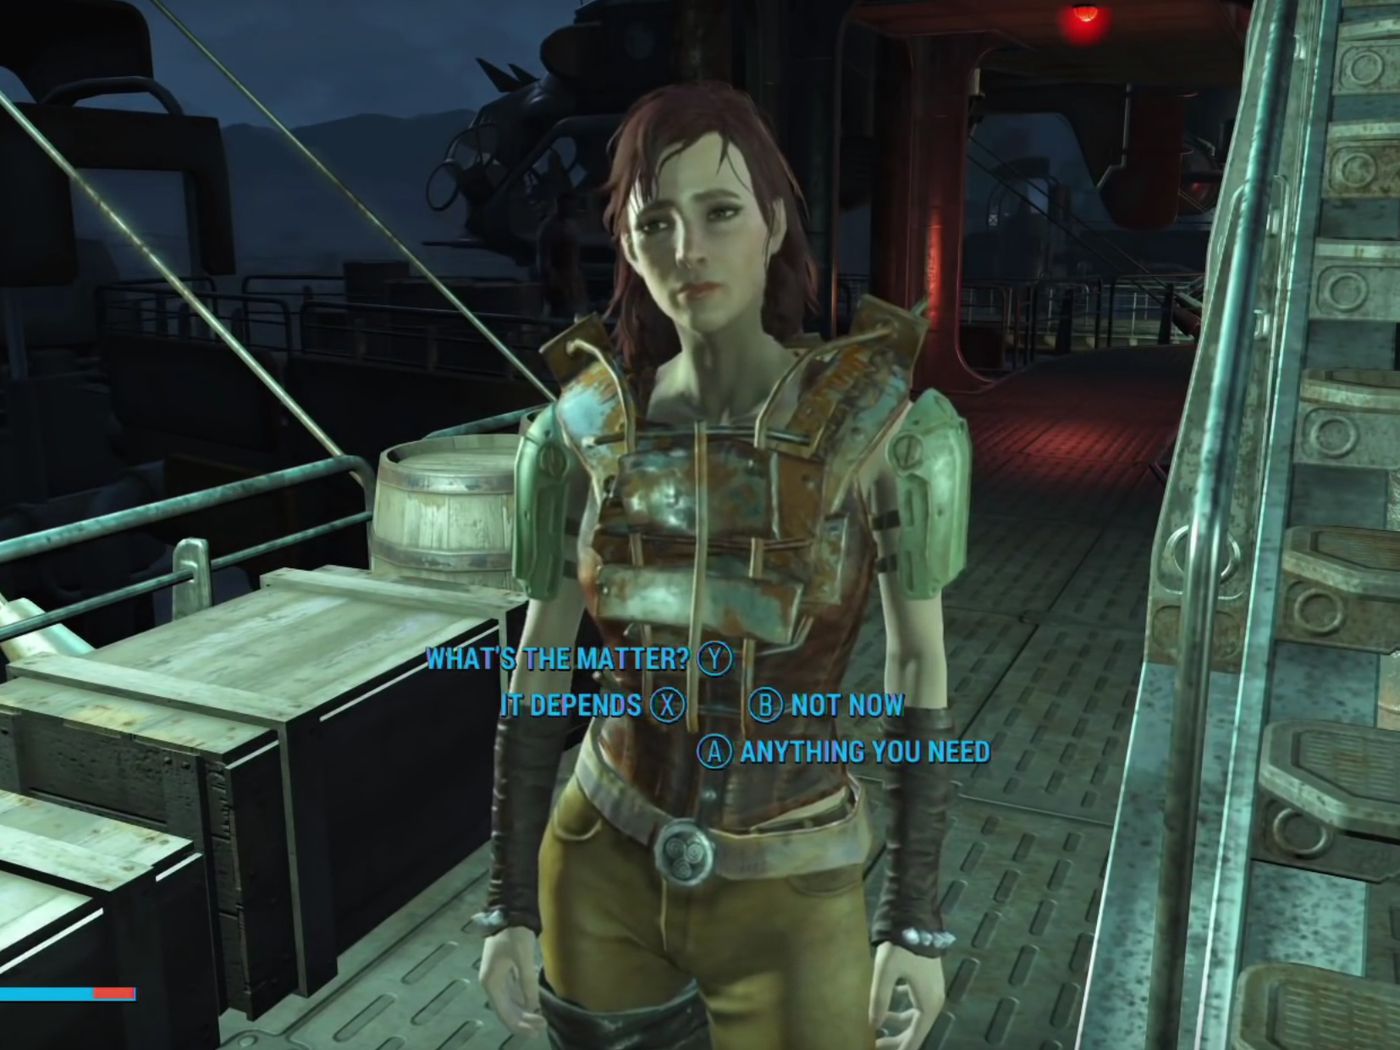 With cait fallout 4 flirt Fallout 4: